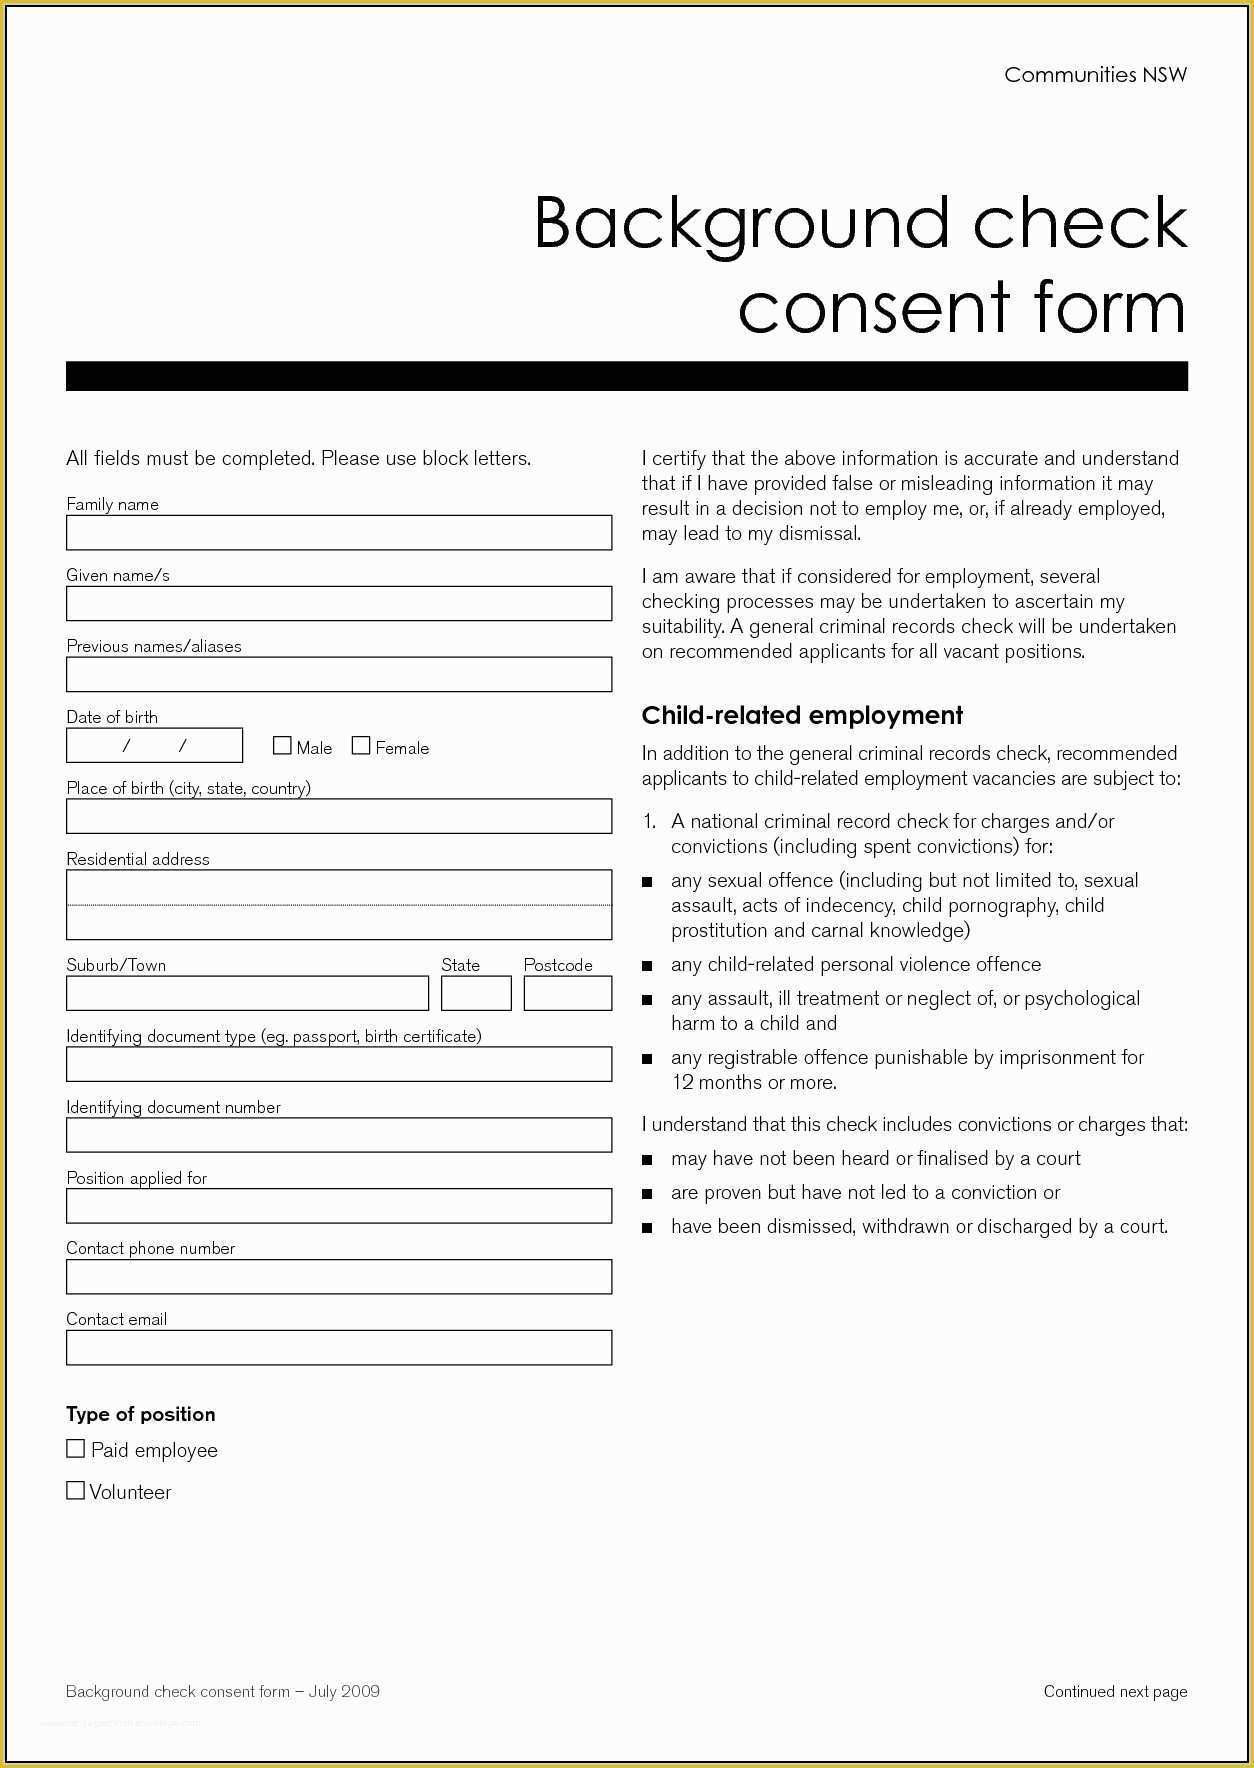 Printable Background Check Authorization Form Template Printable